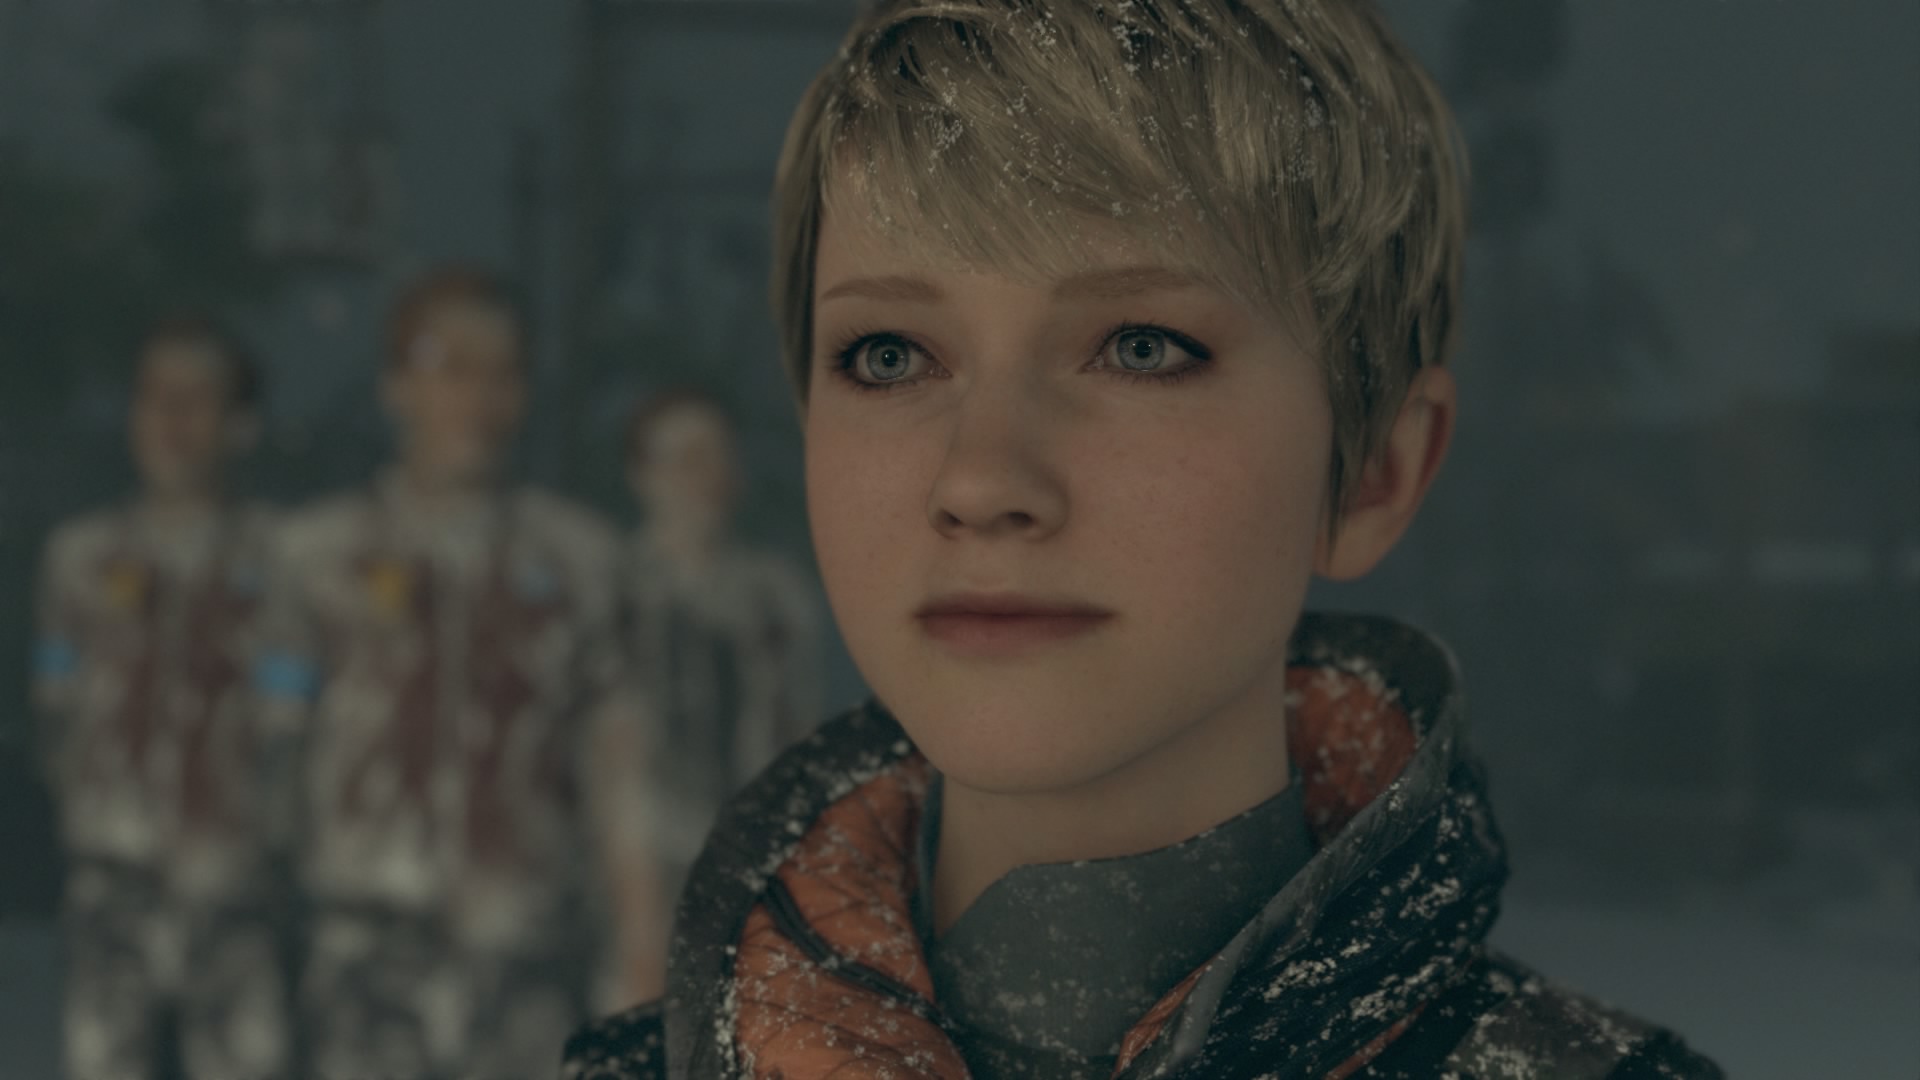 Review Detroit: Become Human